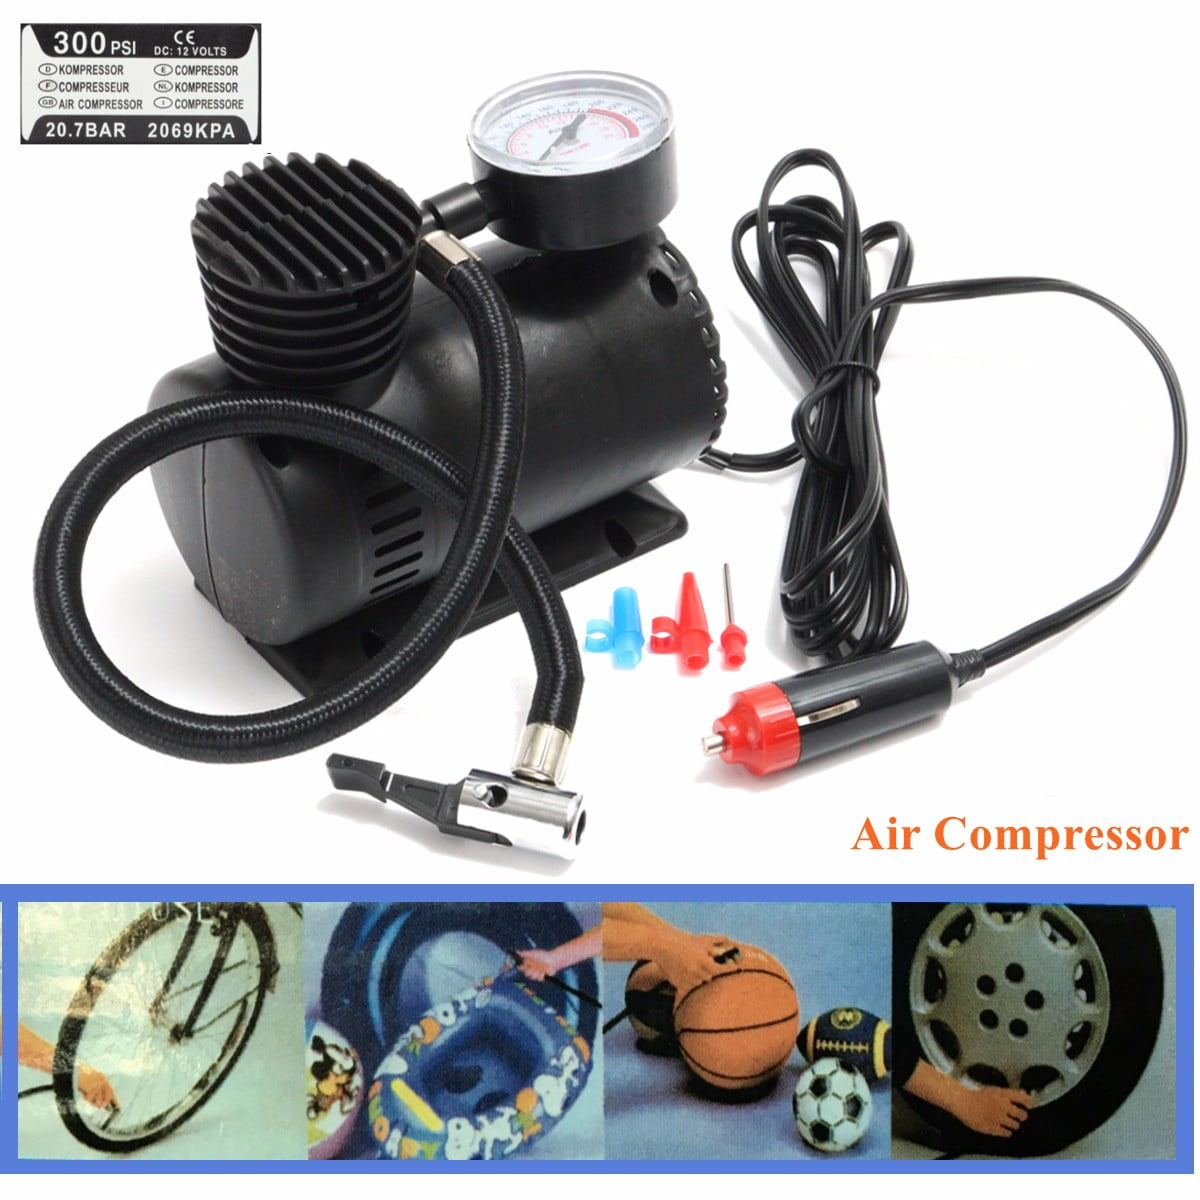 F Fityle Car Air Compressor Pump Portable DC 12V 9A Pump Tire Inflator with Digital Pressure Gauge with LED Light for Car Bicycle 